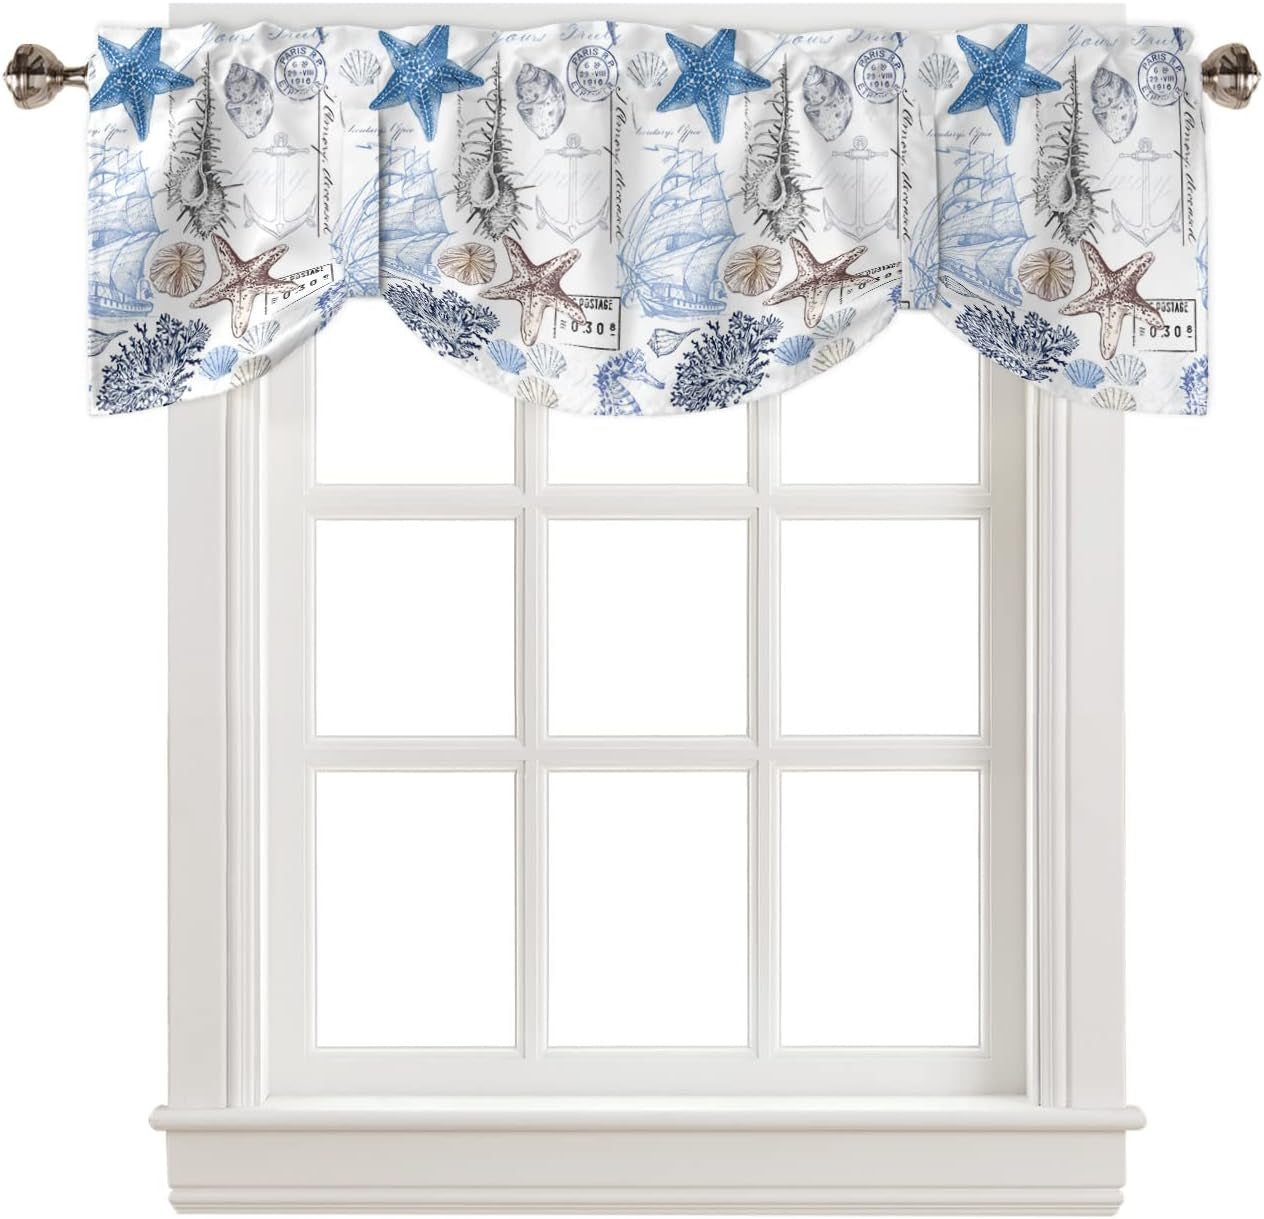 Marine Life Curtains for Bedroom Living Room Aqua Ocean Coral Shell Starfish Roman Shades for Windows Curtains & Drapes Rod Pocket Valances for Kitchen Window Curtains over Sink 54X18In,1 Panel